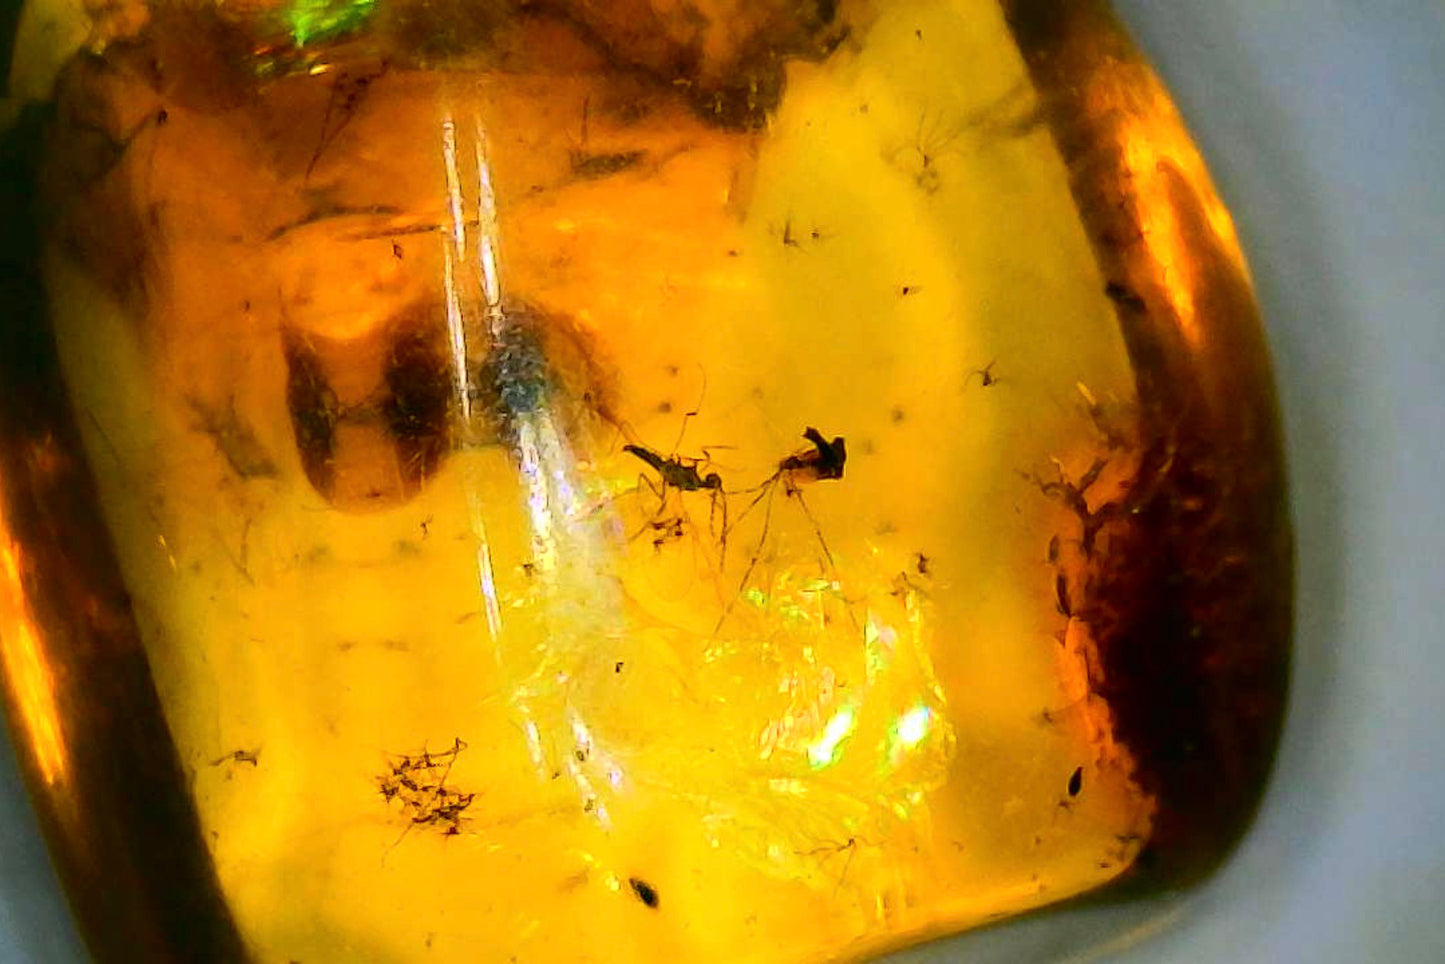 Baltic Amber B with Insect Inclusion